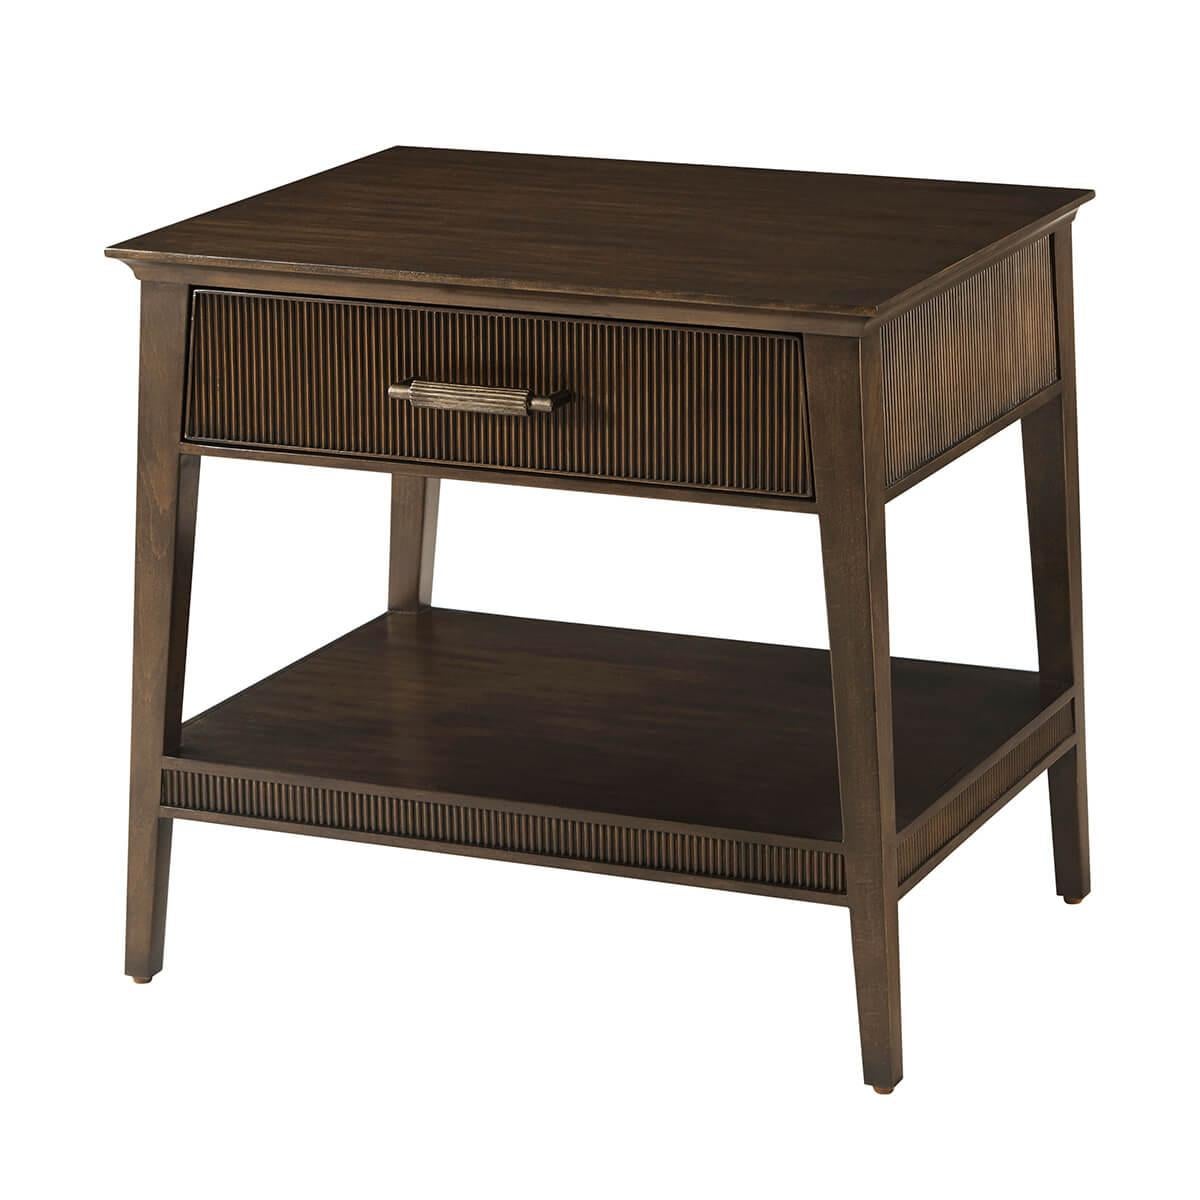 Crafted from Prima Vera in our Bistre finish, features a sophisticated tapered silhouette and reeded drawer and shelf. The custom forged hardware, finished in a dark rubbed bronze, echoes the reeded details throughout.

Dimensions: 24